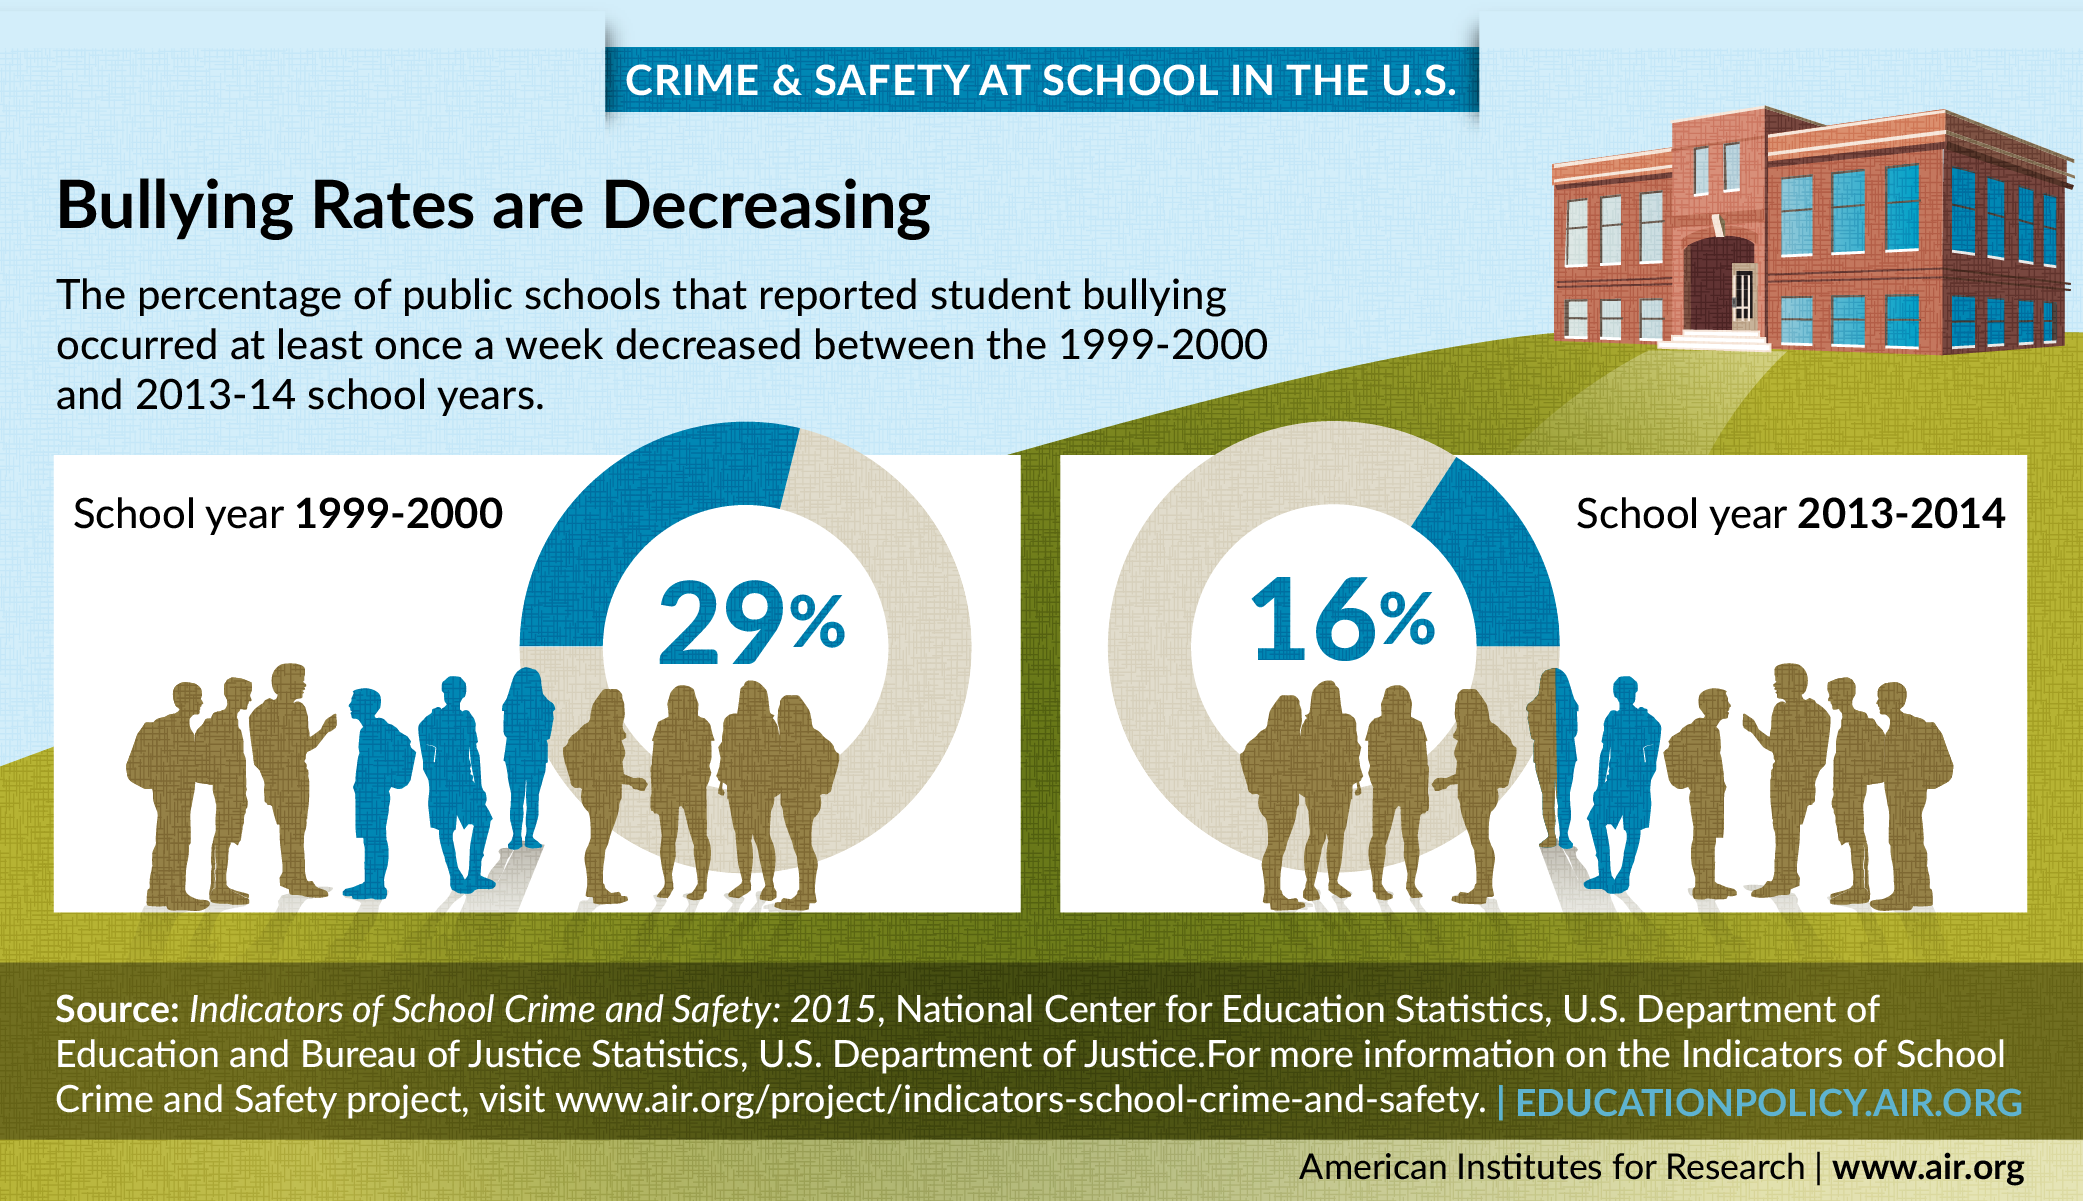 Infographic shows the percentage of public schools that reported student bullying occurred at least once a week decreased between the 1999-2000 and 2013-14 school years. 